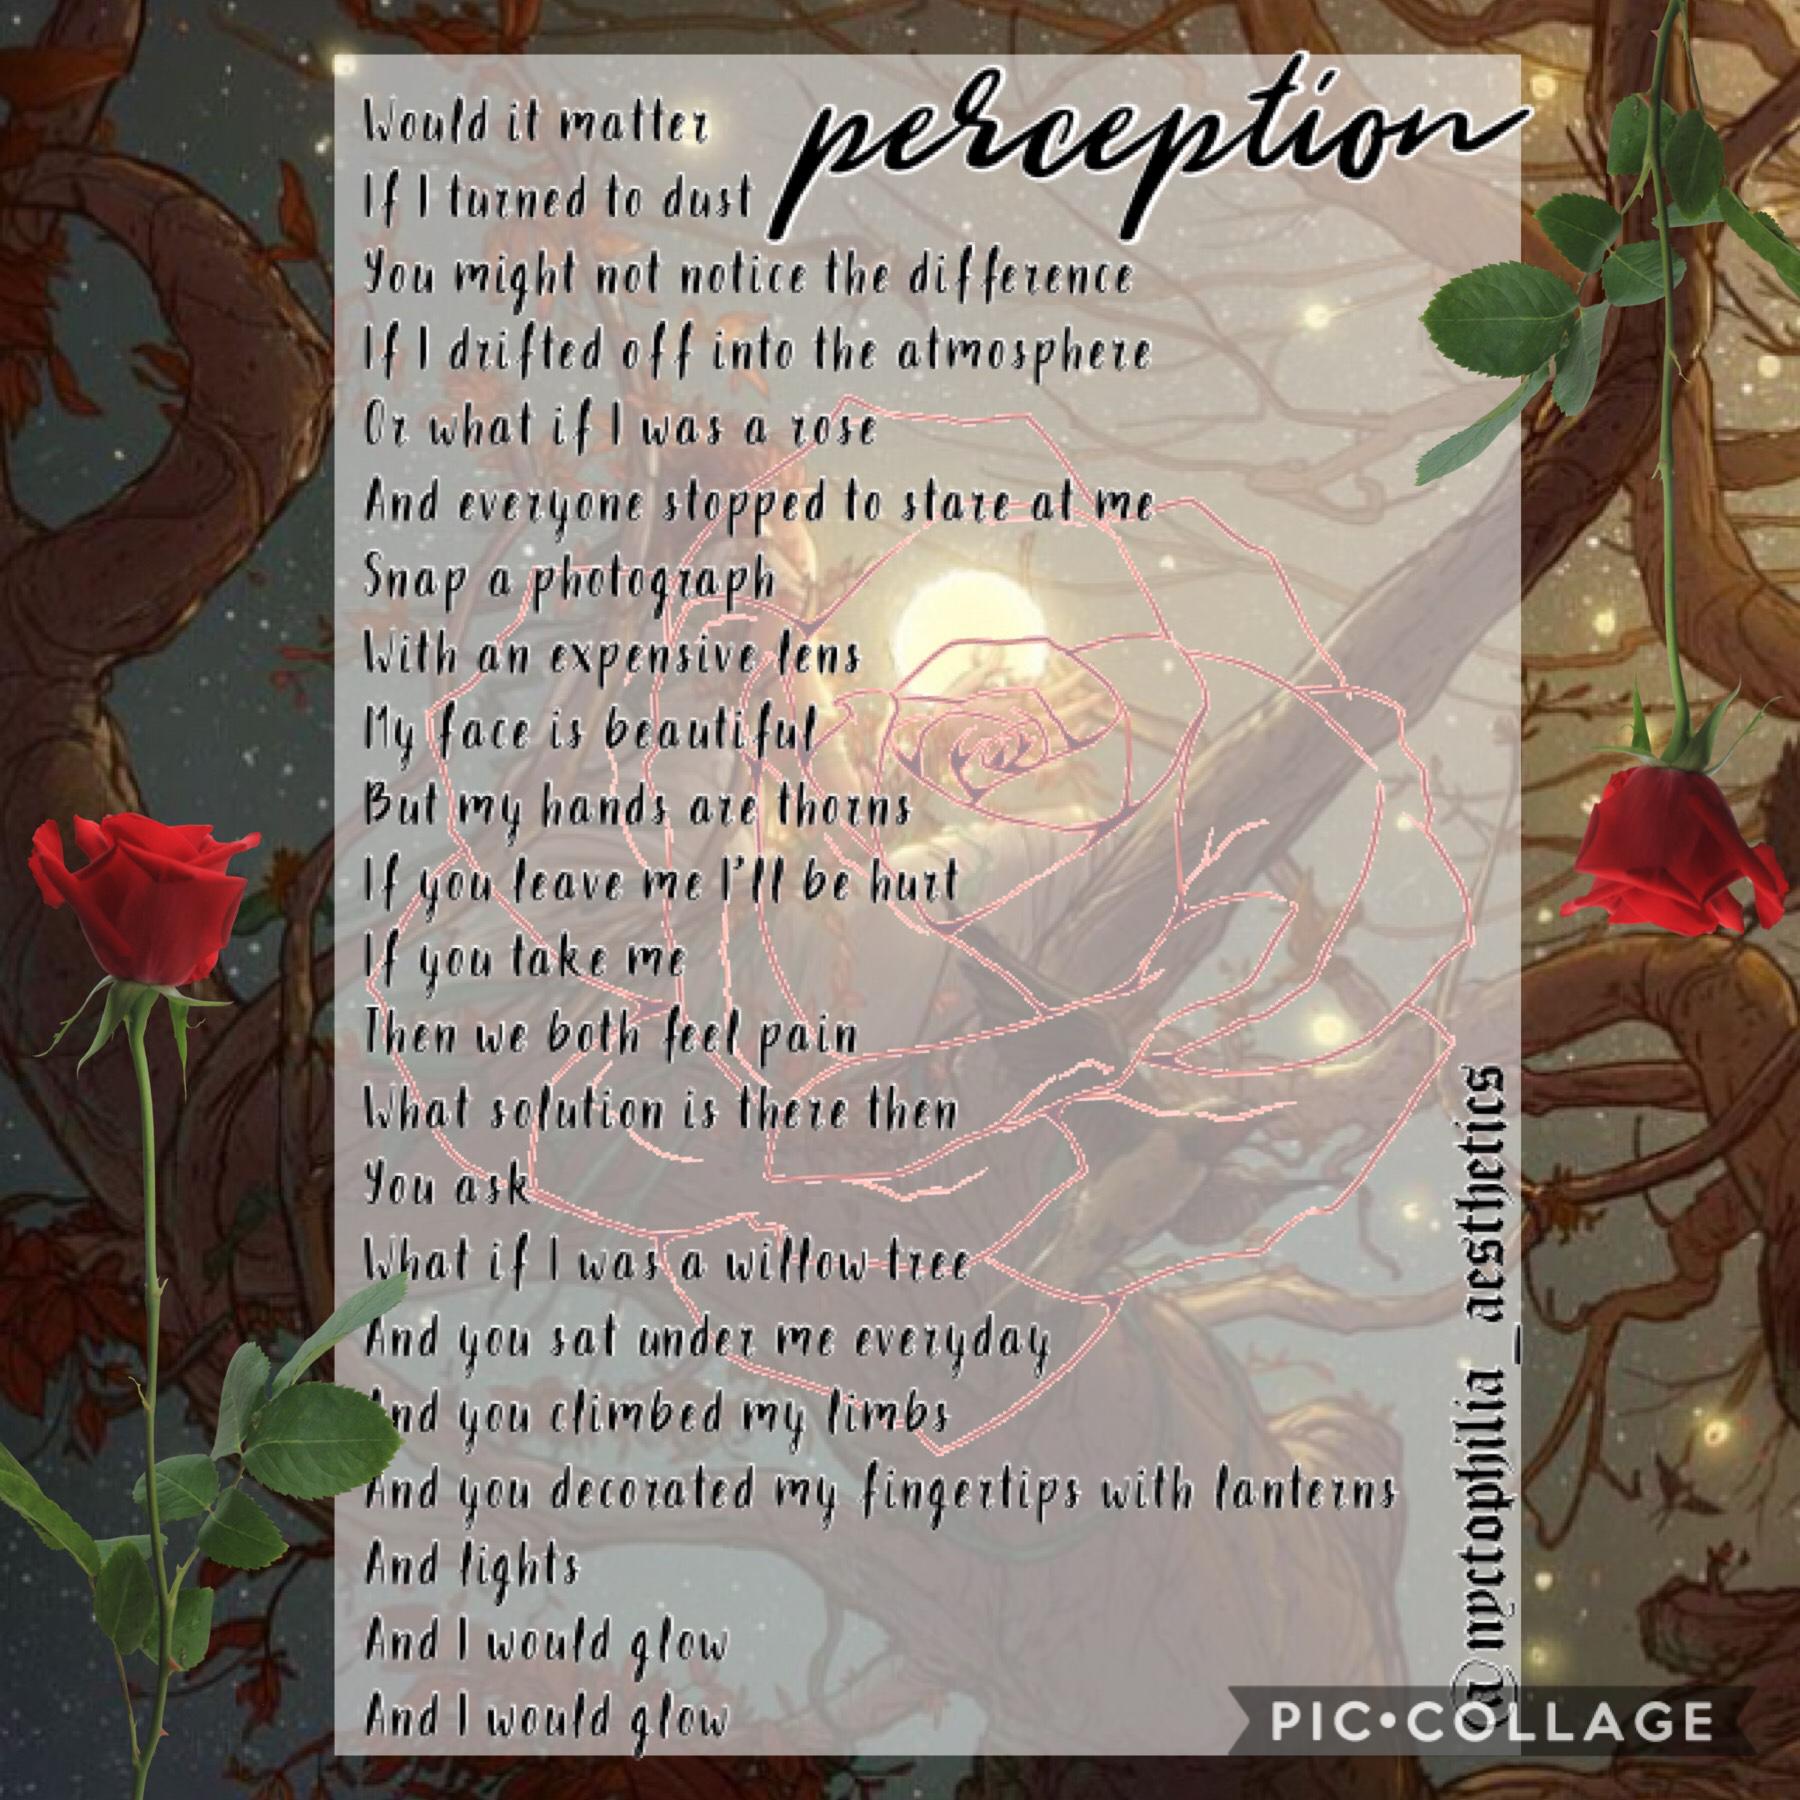 🥀✨New Poem! Yay!! What do you think? *JOIN THE WORD ICON TREND! DON’T FORGET TO GIVE CREDIT!* ZoOm!✨🥀